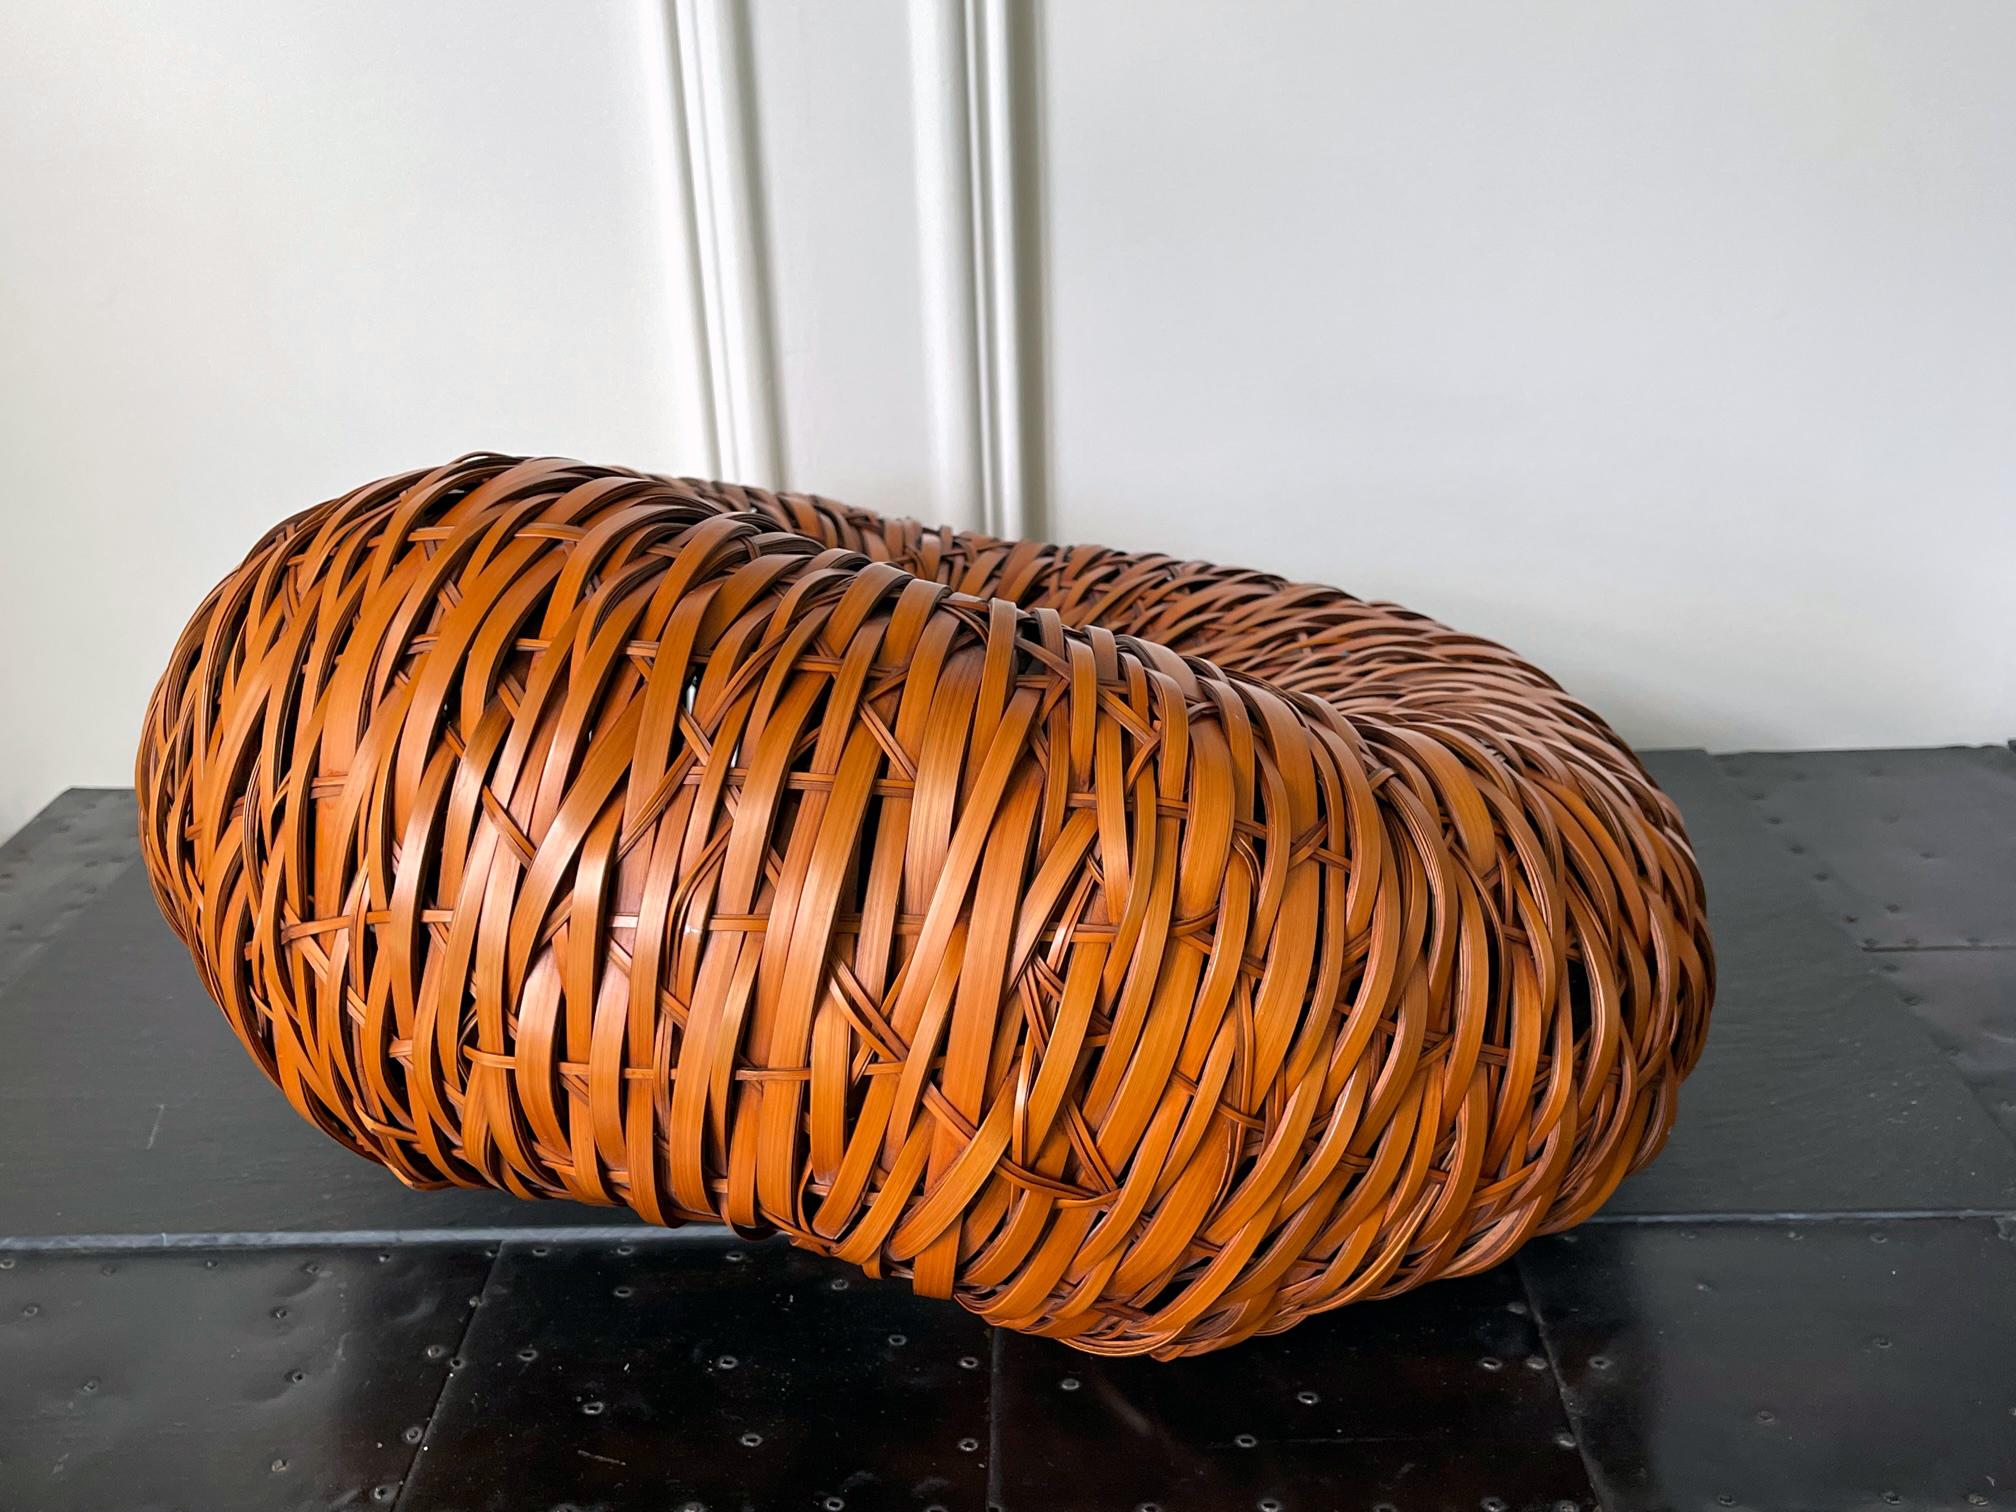 Hand-Woven Large Contemporary Japanese Woven Bamboo Sculpture Mimura Chikuho For Sale